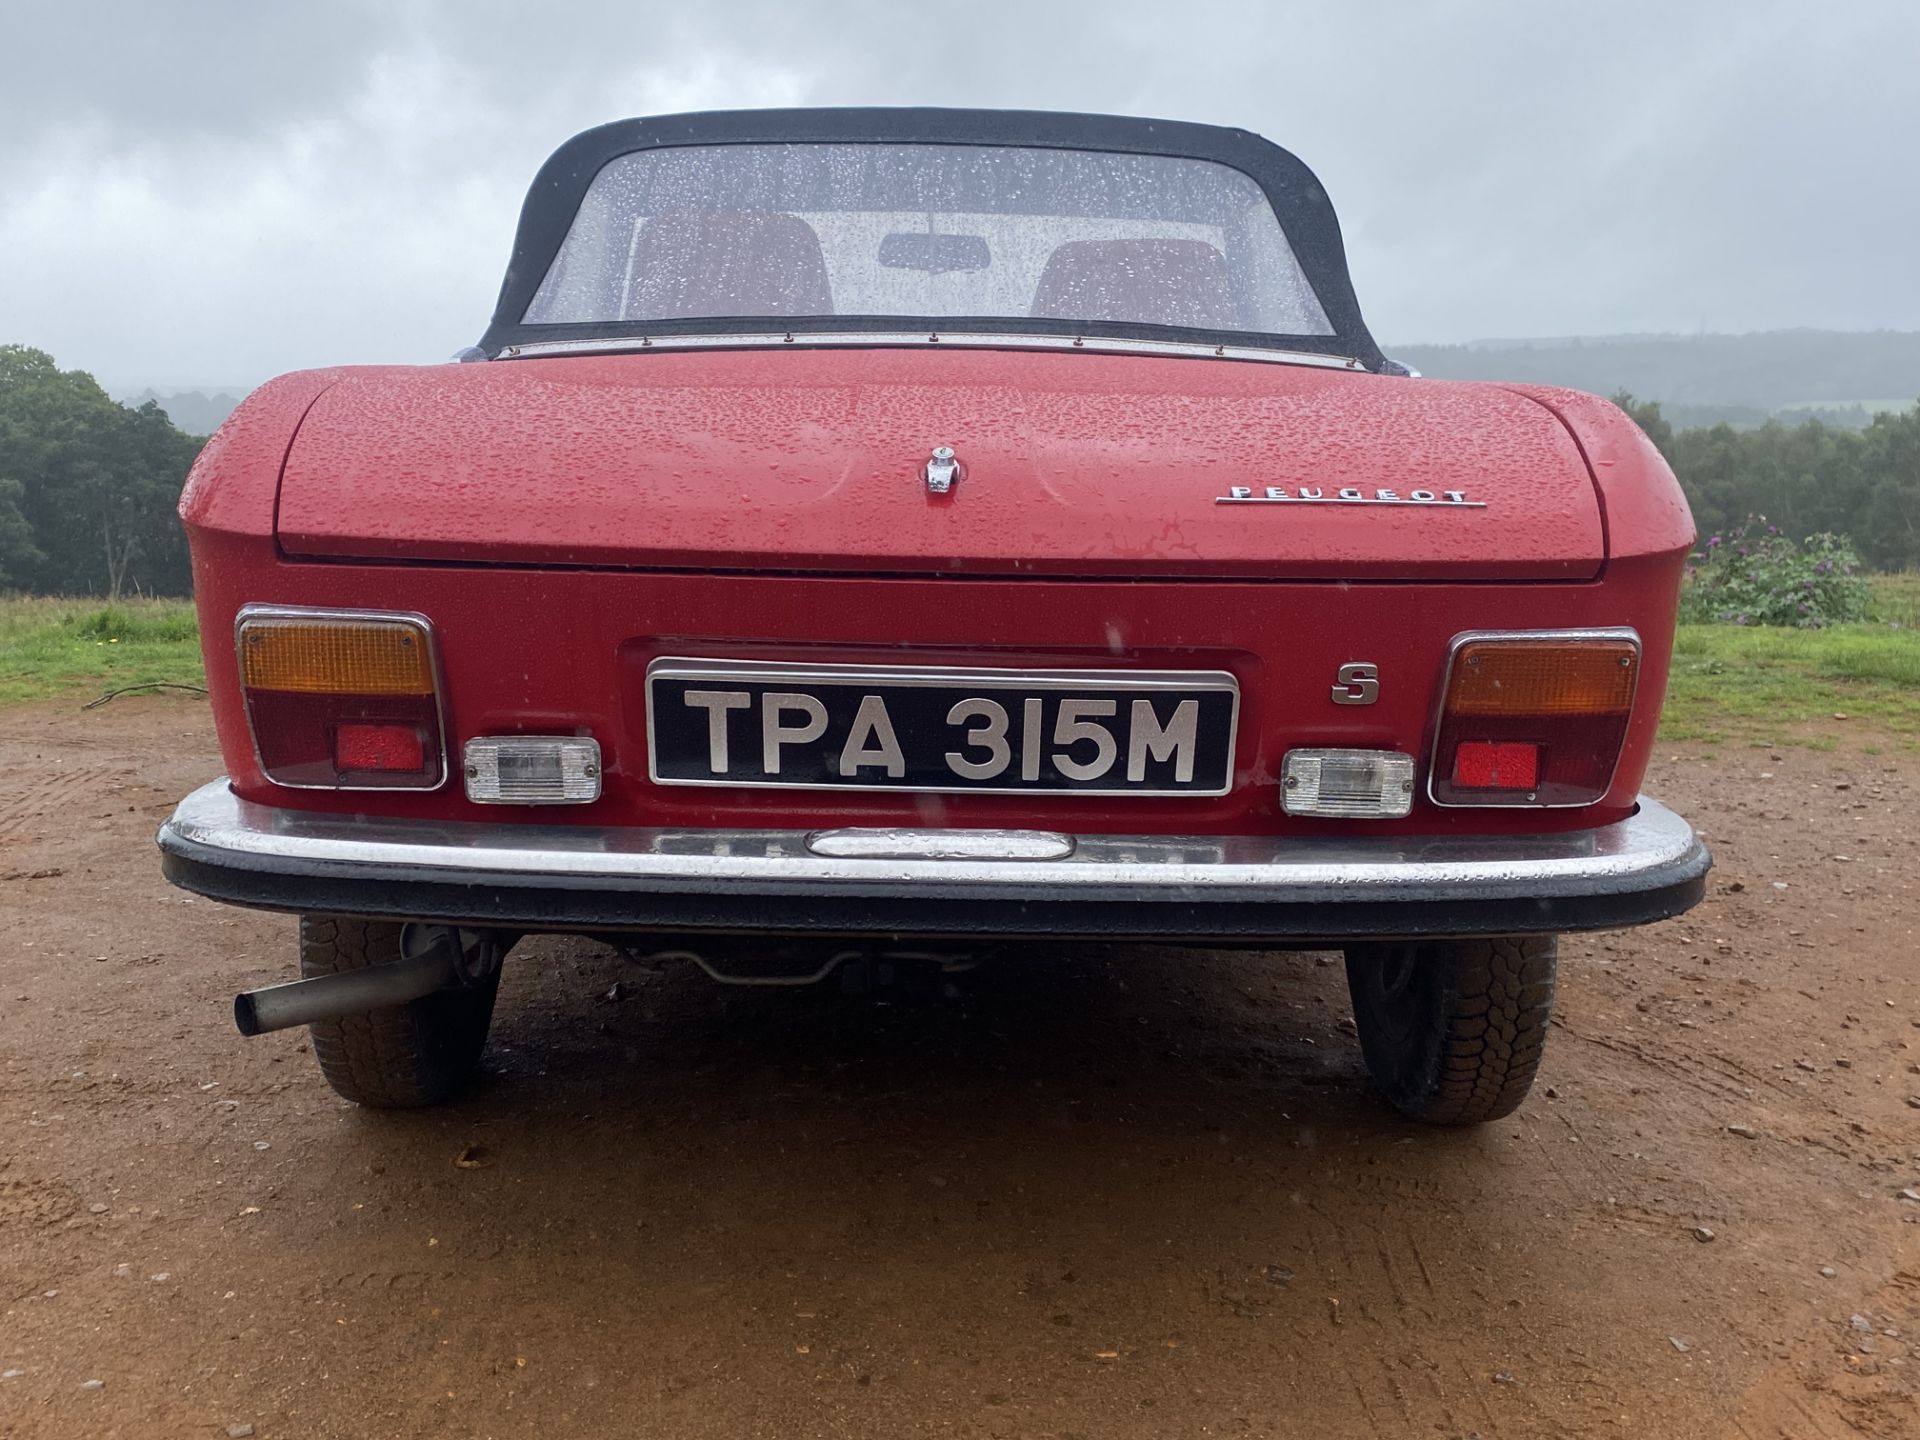 Peugeot 304 Convertible. Registration number: TPA 315M. Rare RHD drive model with 82,696 miles from - Image 13 of 14